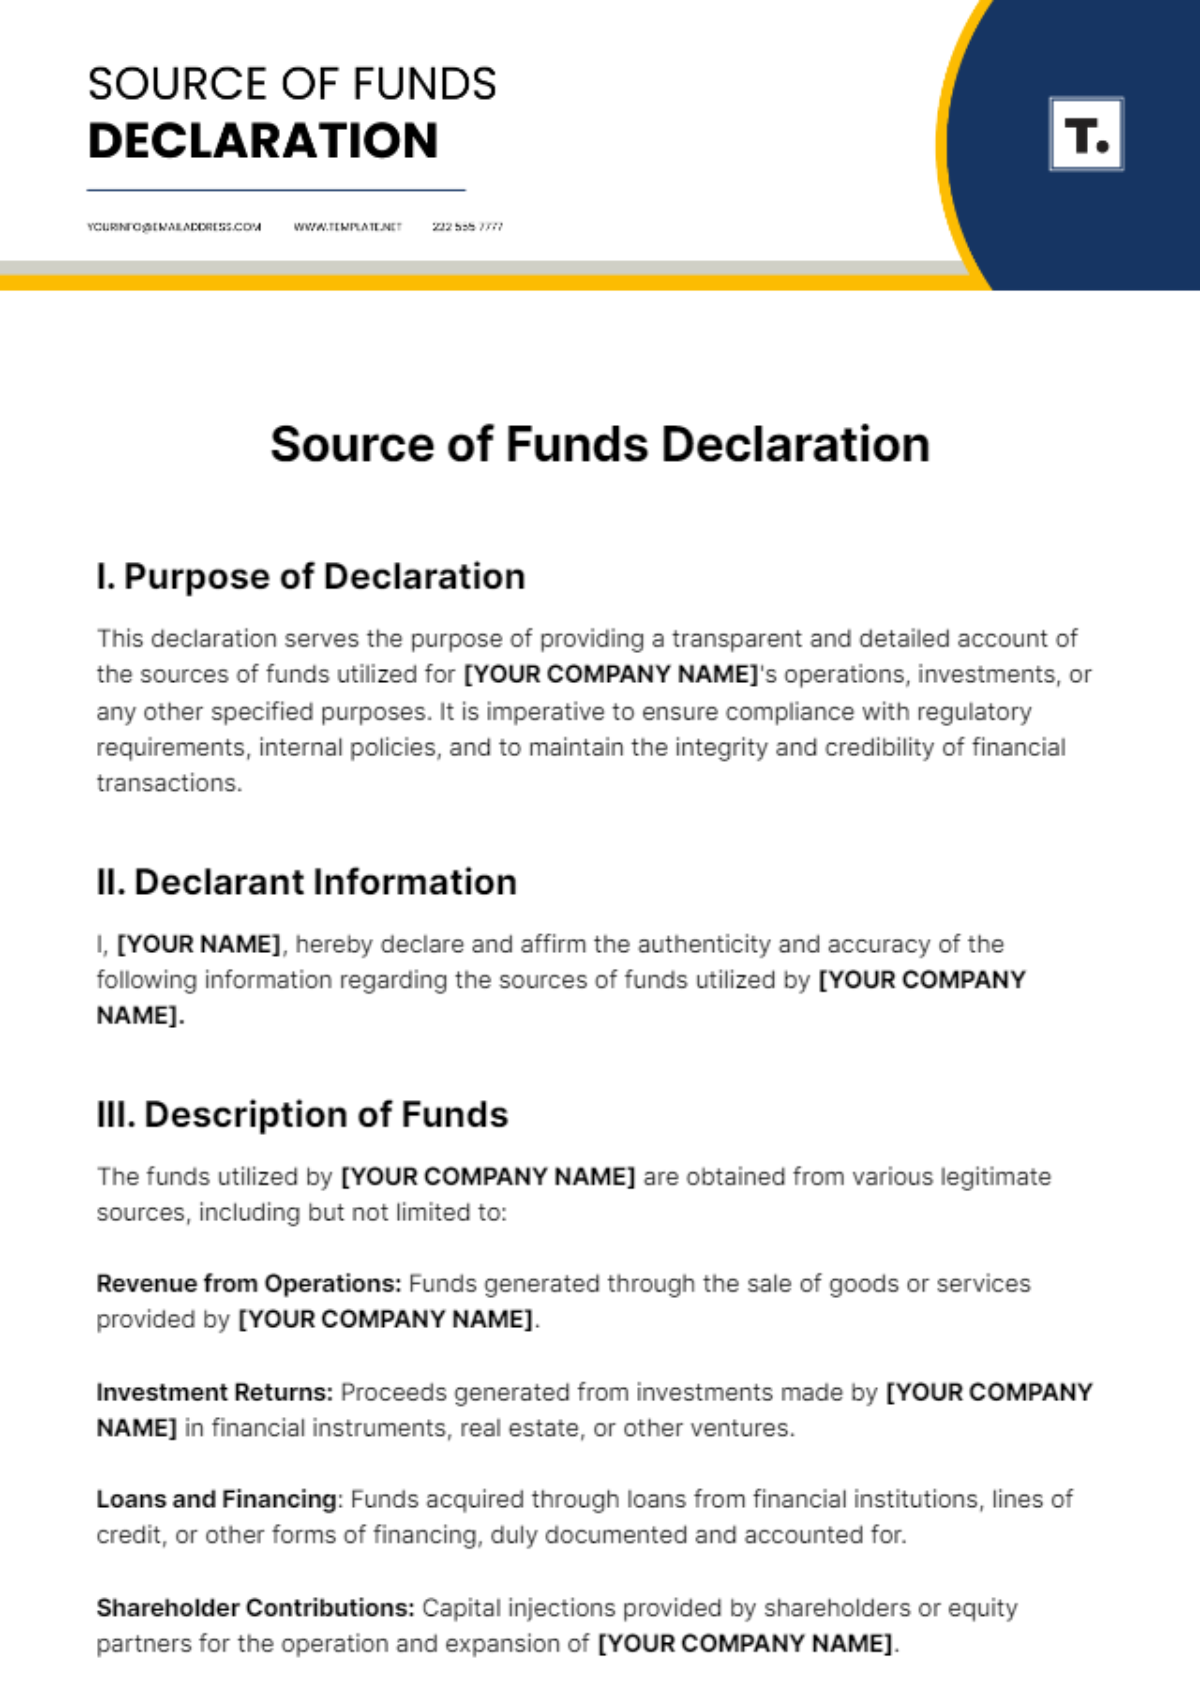 Source of Funds Declaration Template